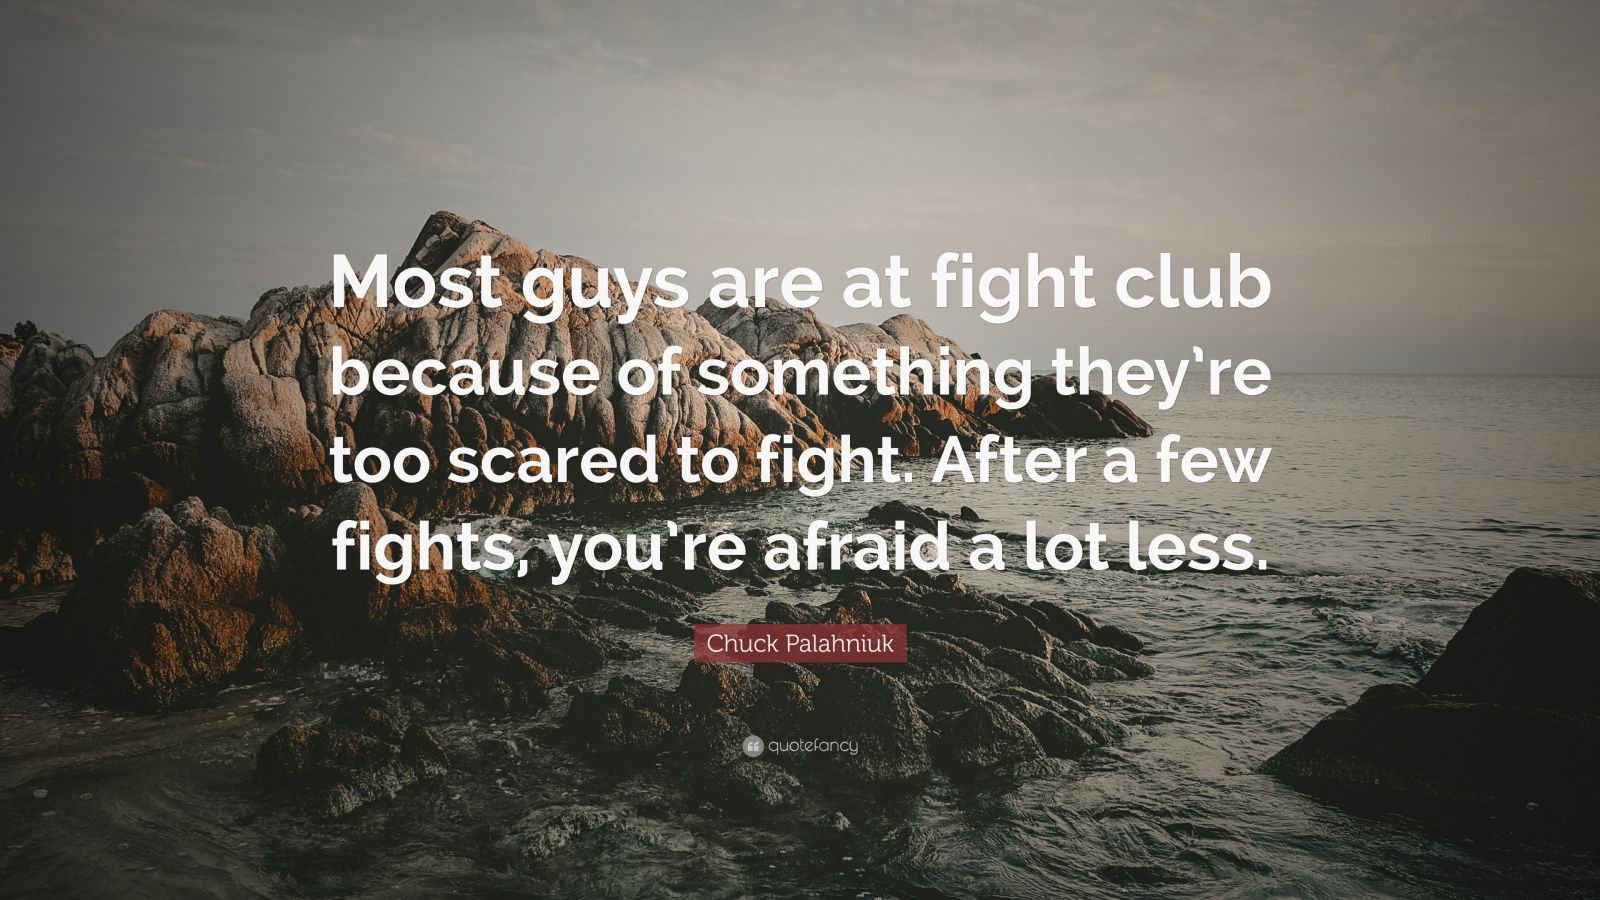 Chuck Palahniuk Quote: “Most guys are at fight club because of ...